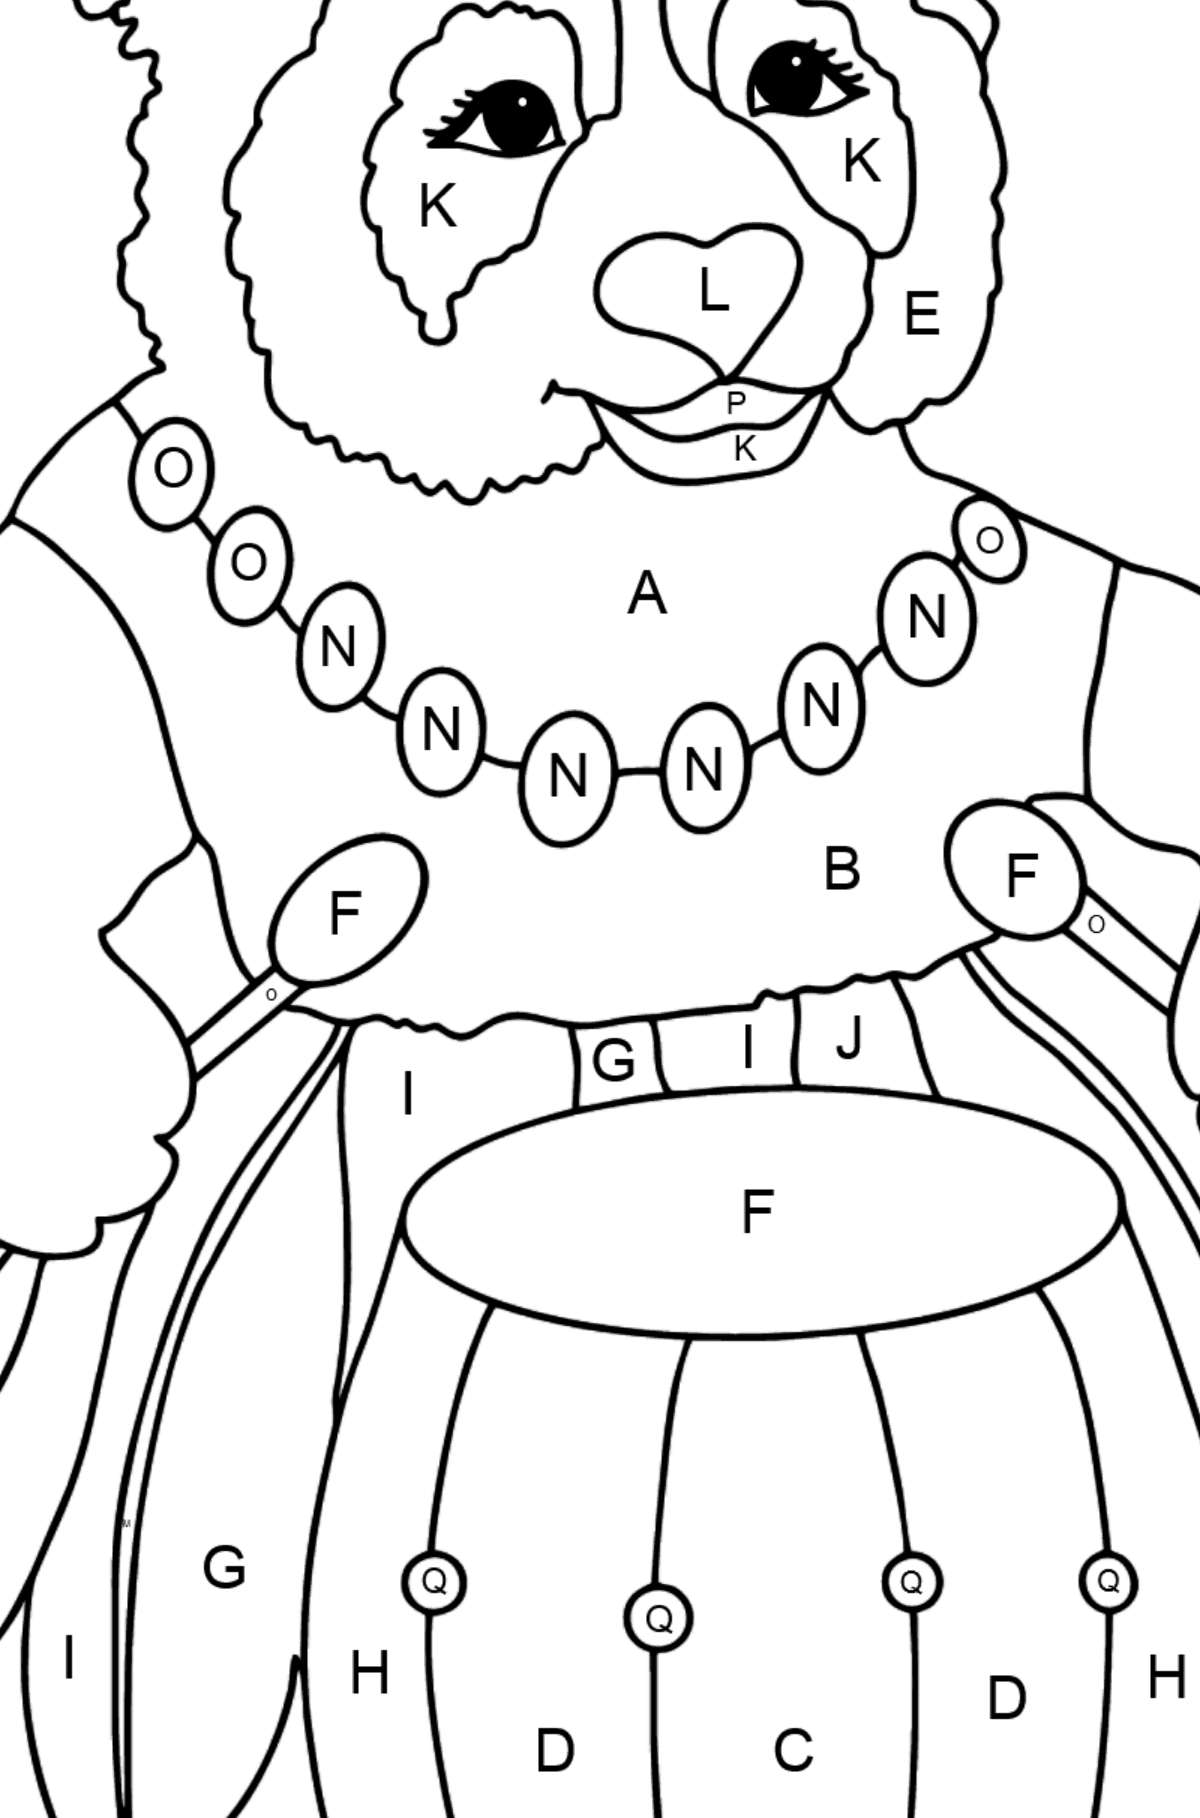 Coloring Picture - A Panda Drummer - Coloring by Letters for Kids